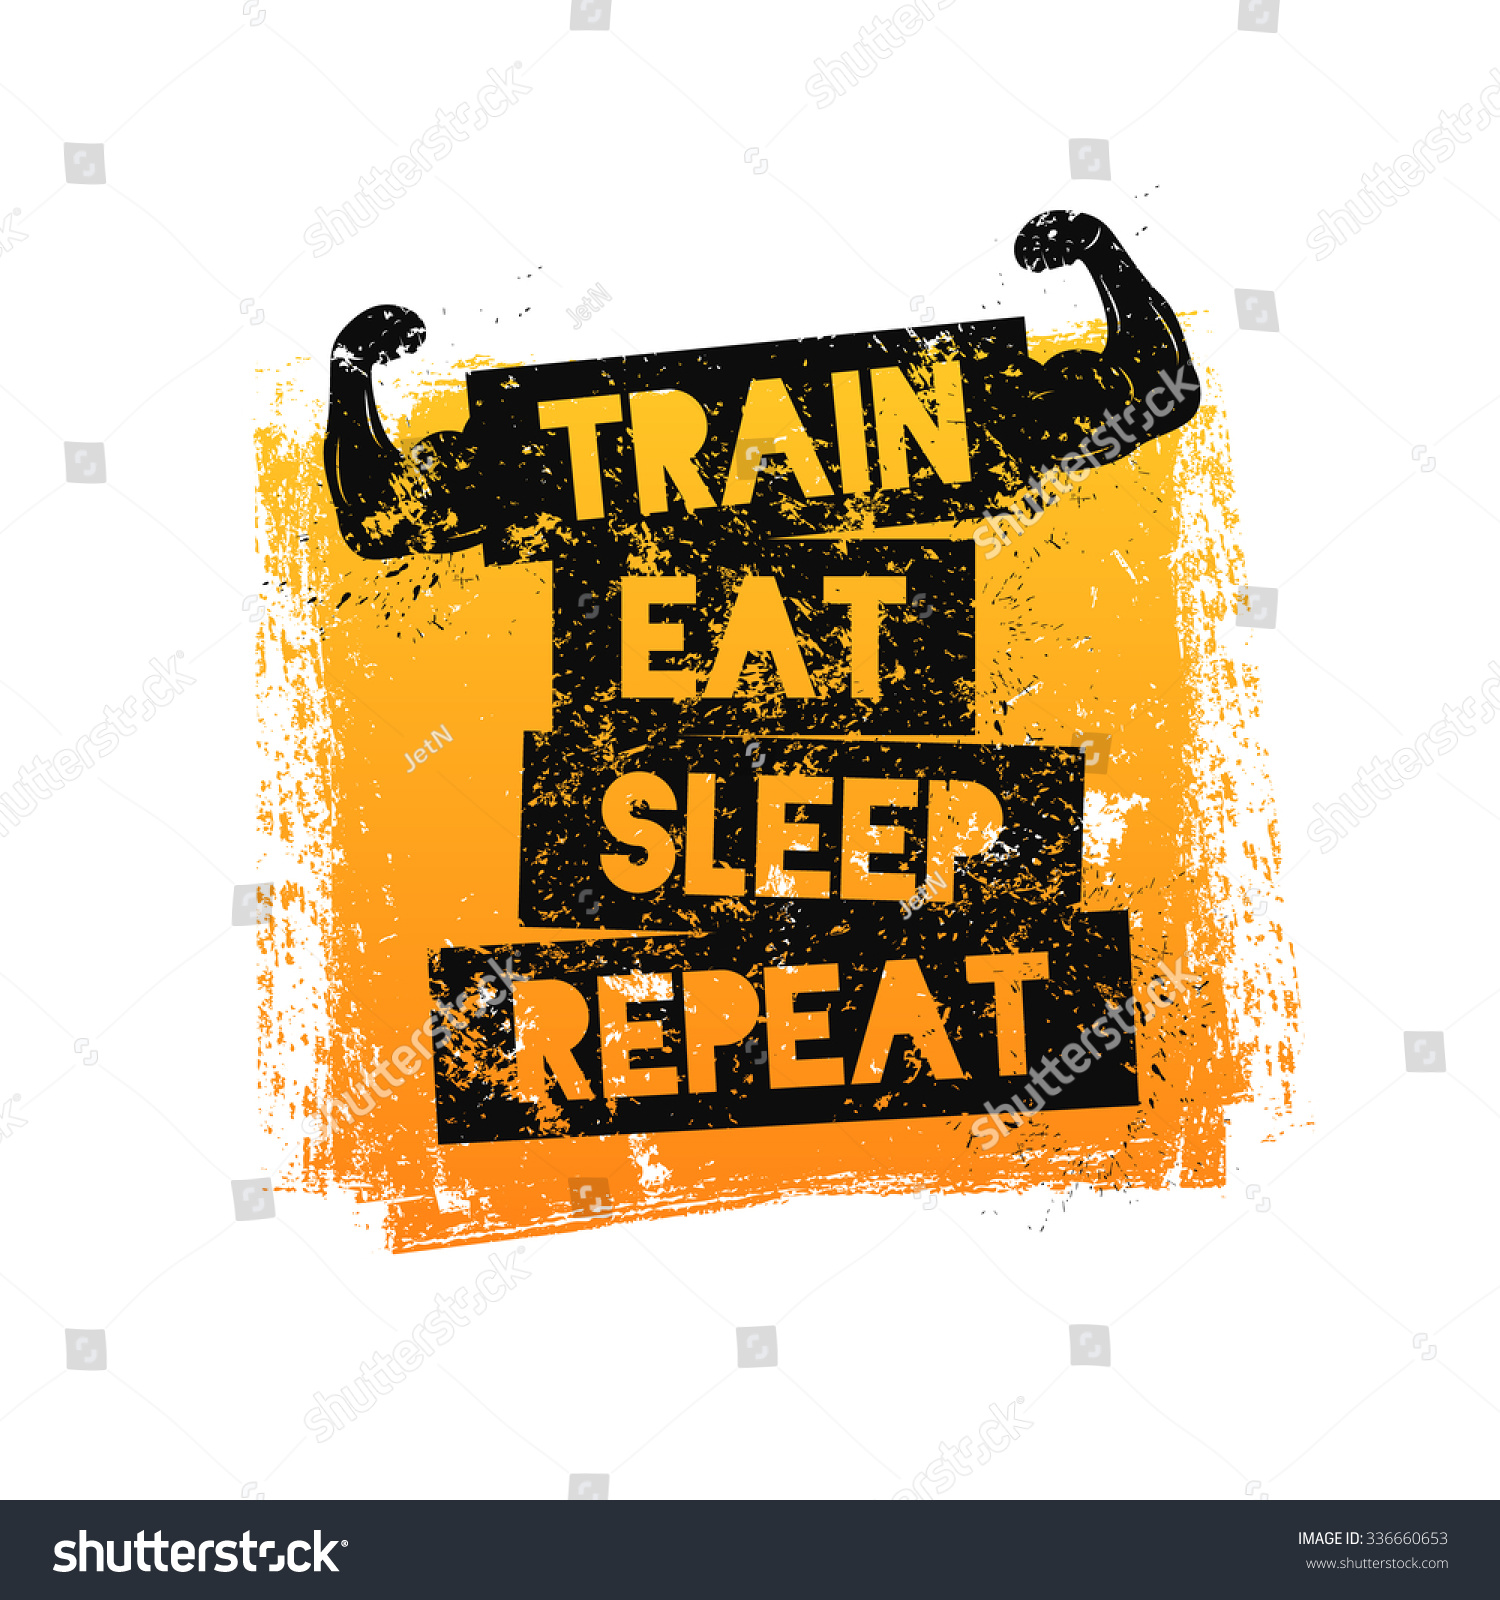 Train Eat Sleep Repeat Motivational Quote Stock Vector Royalty Free 336660653 Shutterstock